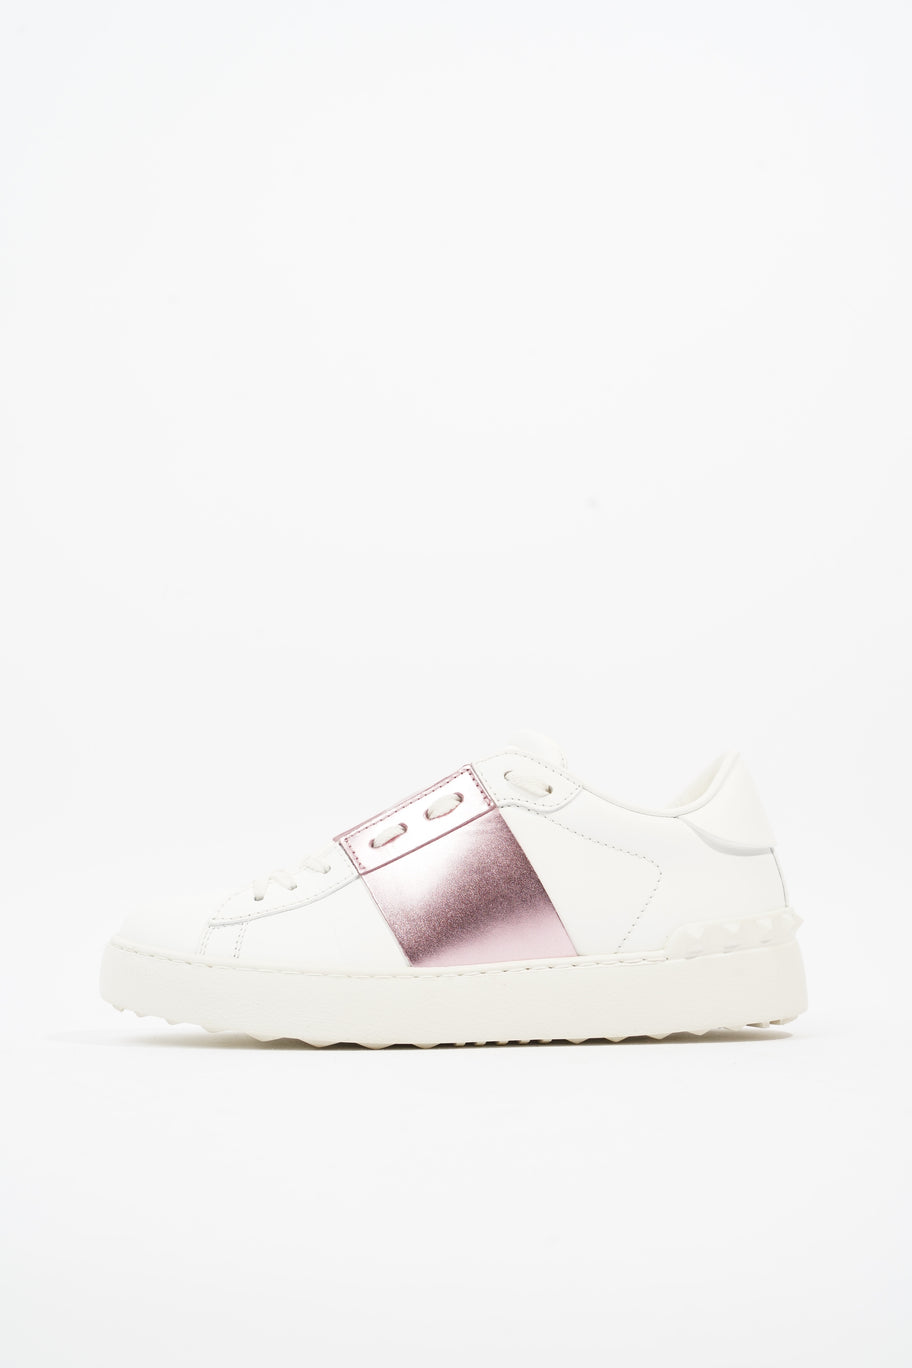 Open Sneakers White / Pink Leather EU 37.5 UK 4.5 Image 5